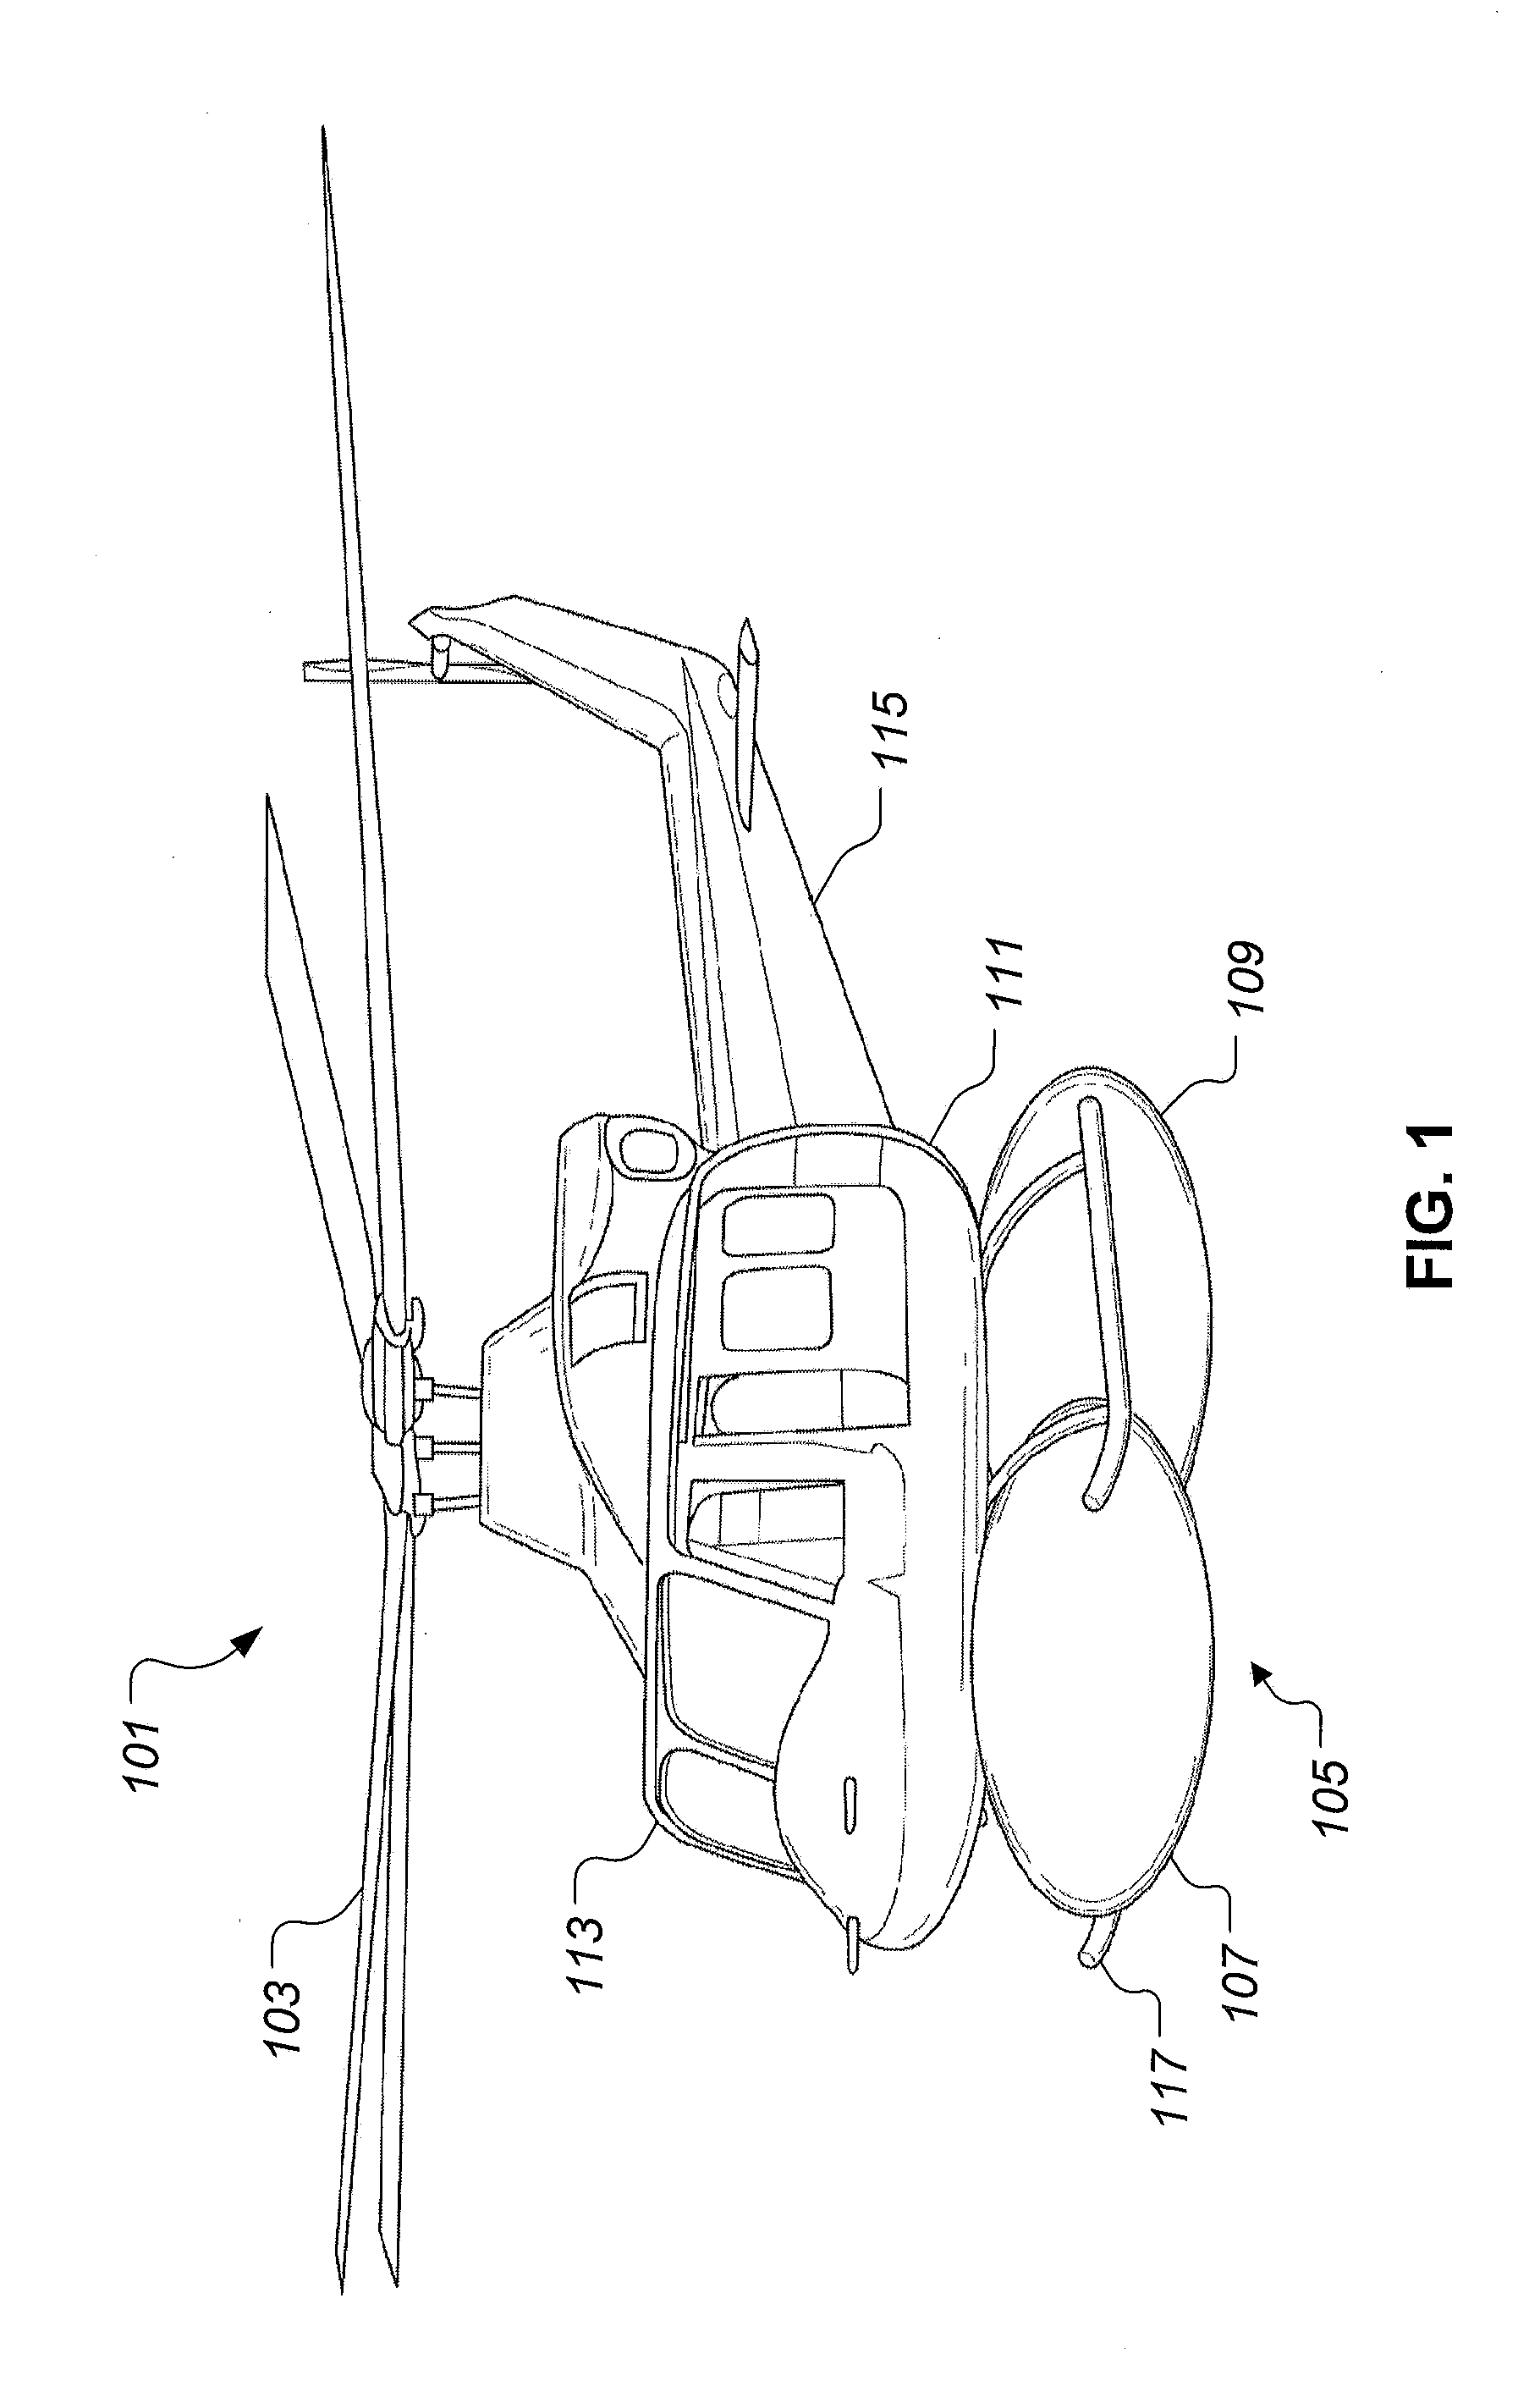 Active vent and re-inflation system for a crash attentuation airbag